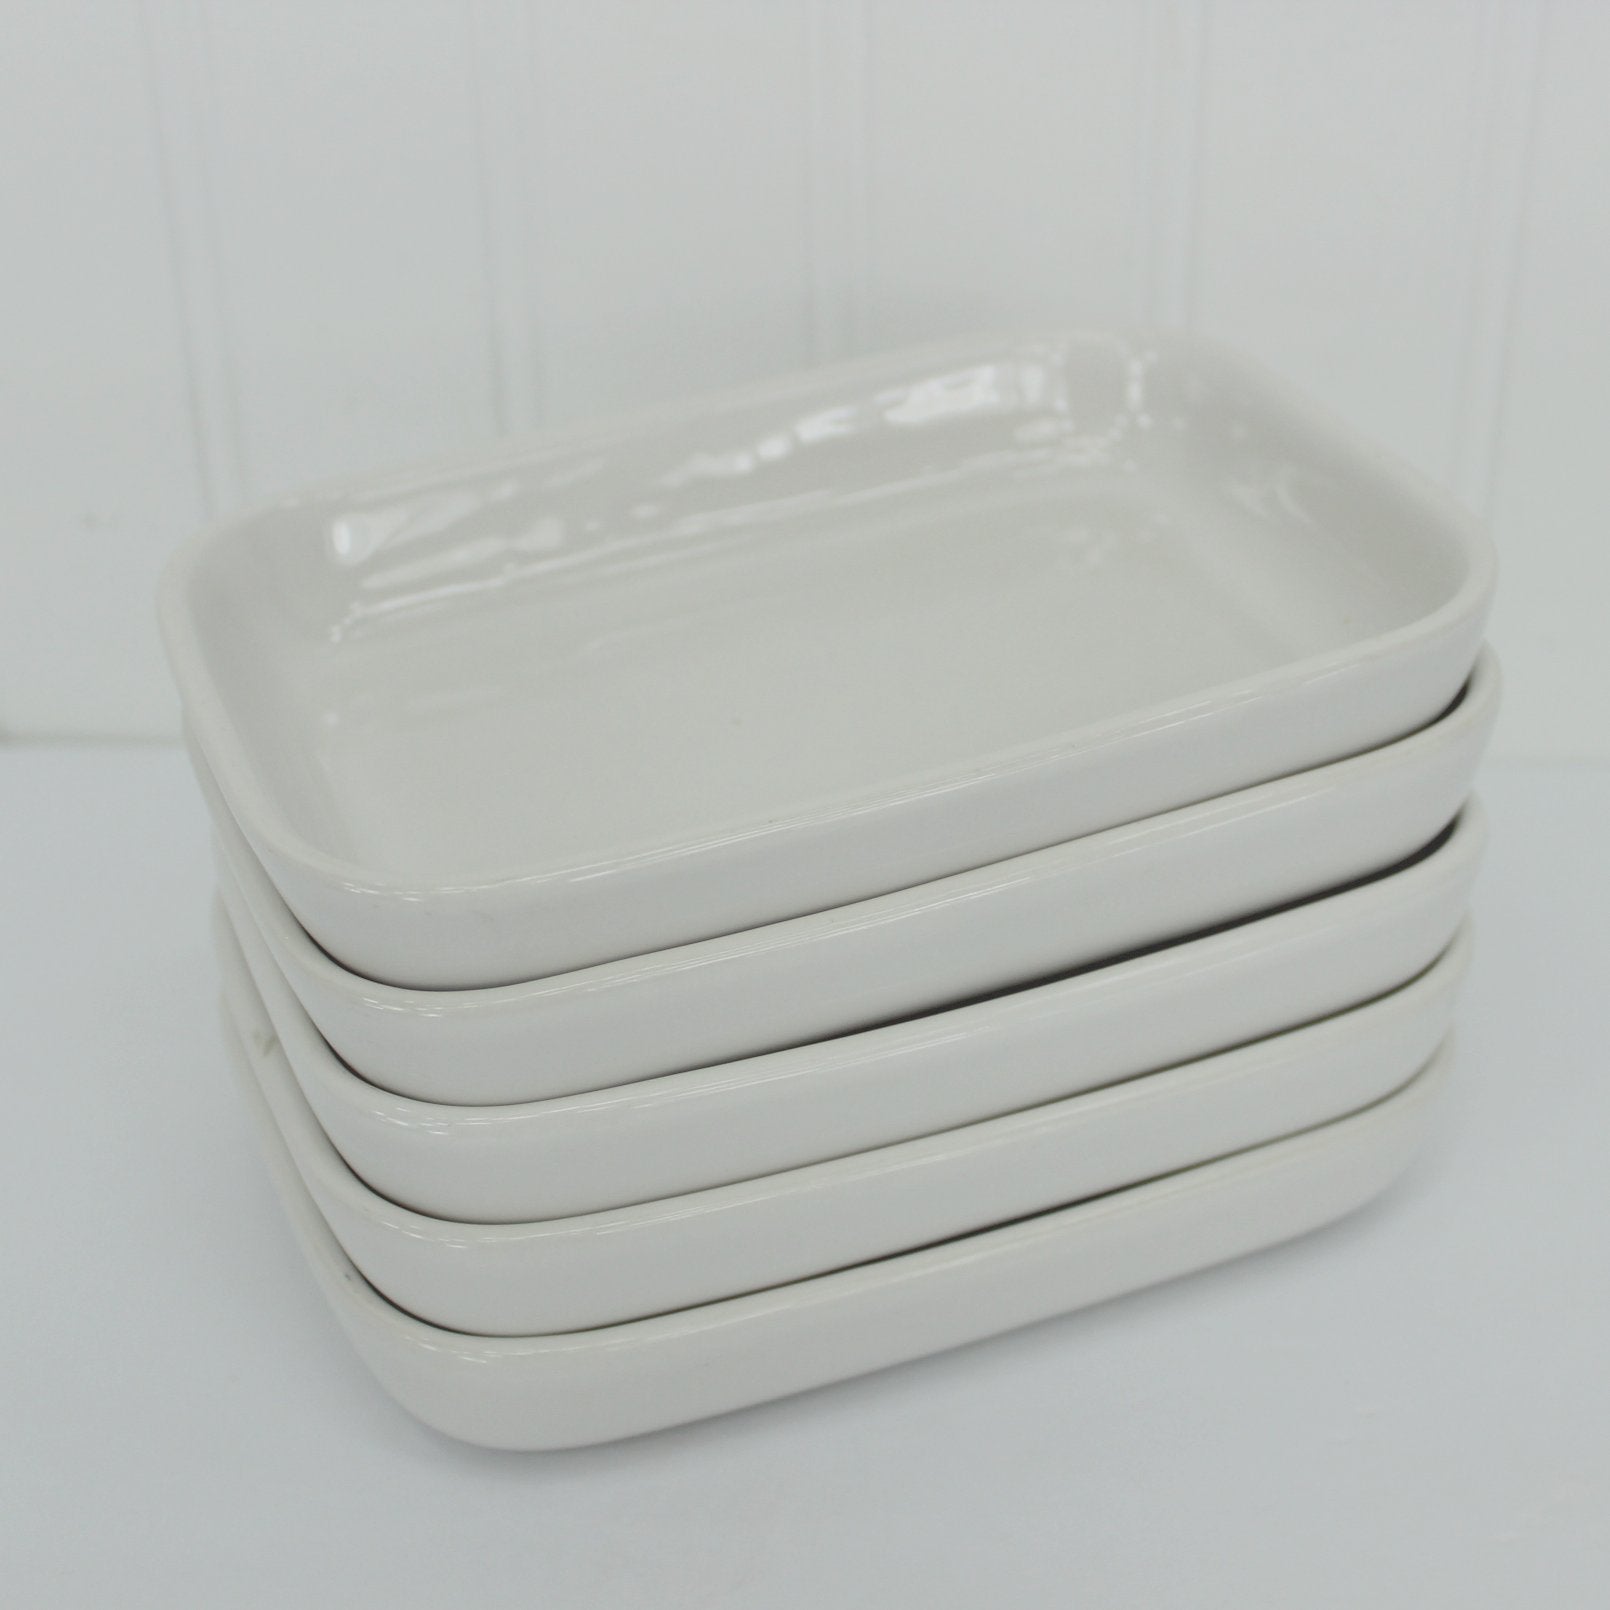 Pfaltzgraff American Airlines 1st Class Snack Trays 5 Set stacks stores well